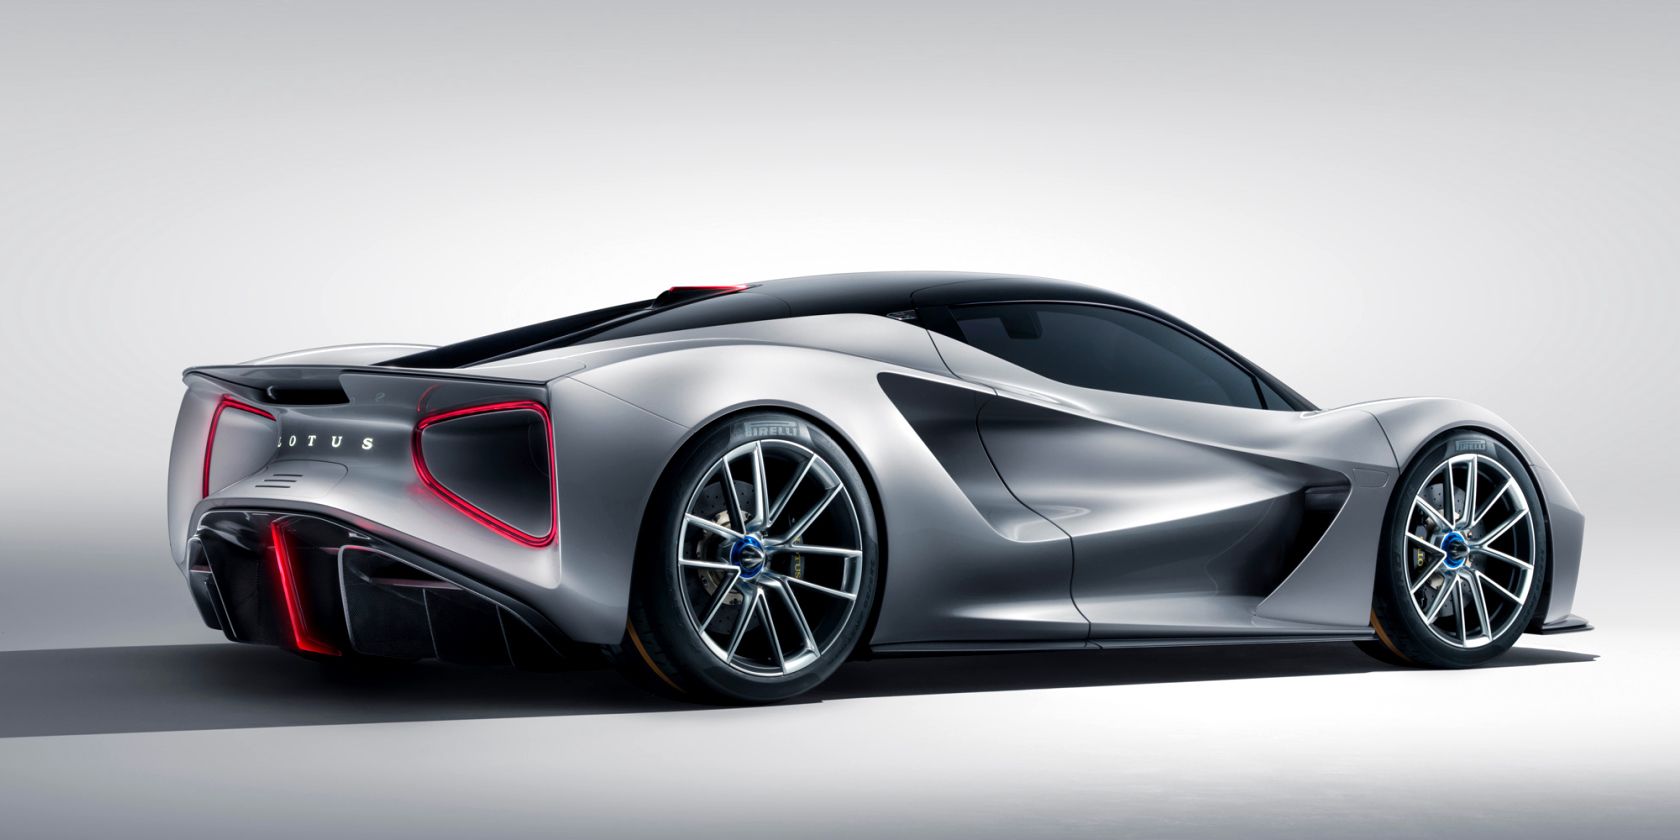 4 High-Performance EVs You Should Watch Out For